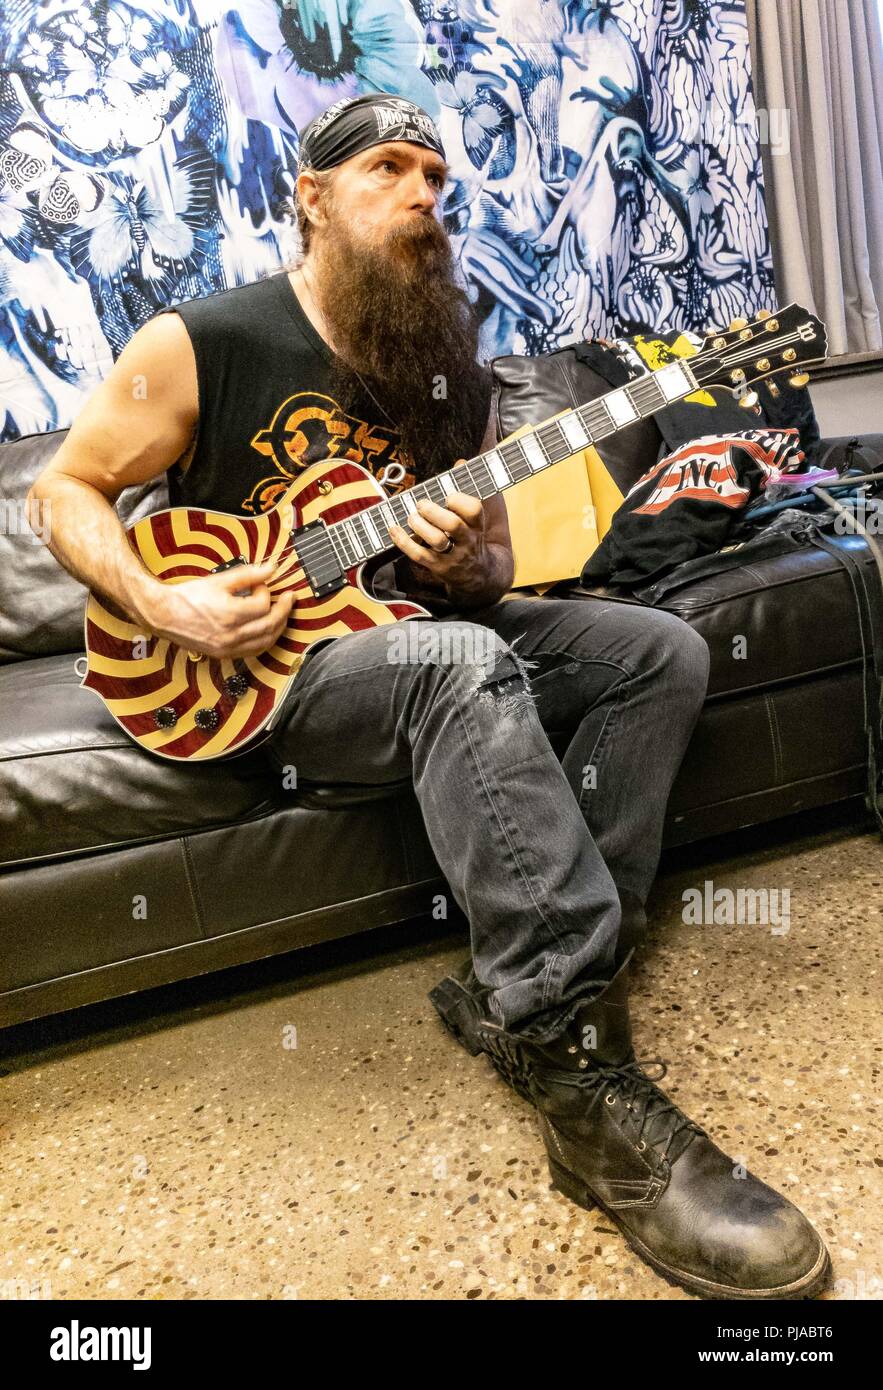 Toronto, Ontario, Canada. 4th Sep, 2018. Metal guitarist, singer and songwriter ZAKK WYLDE warming up before Ozzy Osbourne show at Budweiser Stage in Toronto during 'No More Tours 2' tour. Credit: Igor Vidyashev/ZUMA Wire/Alamy Live News Stock Photo